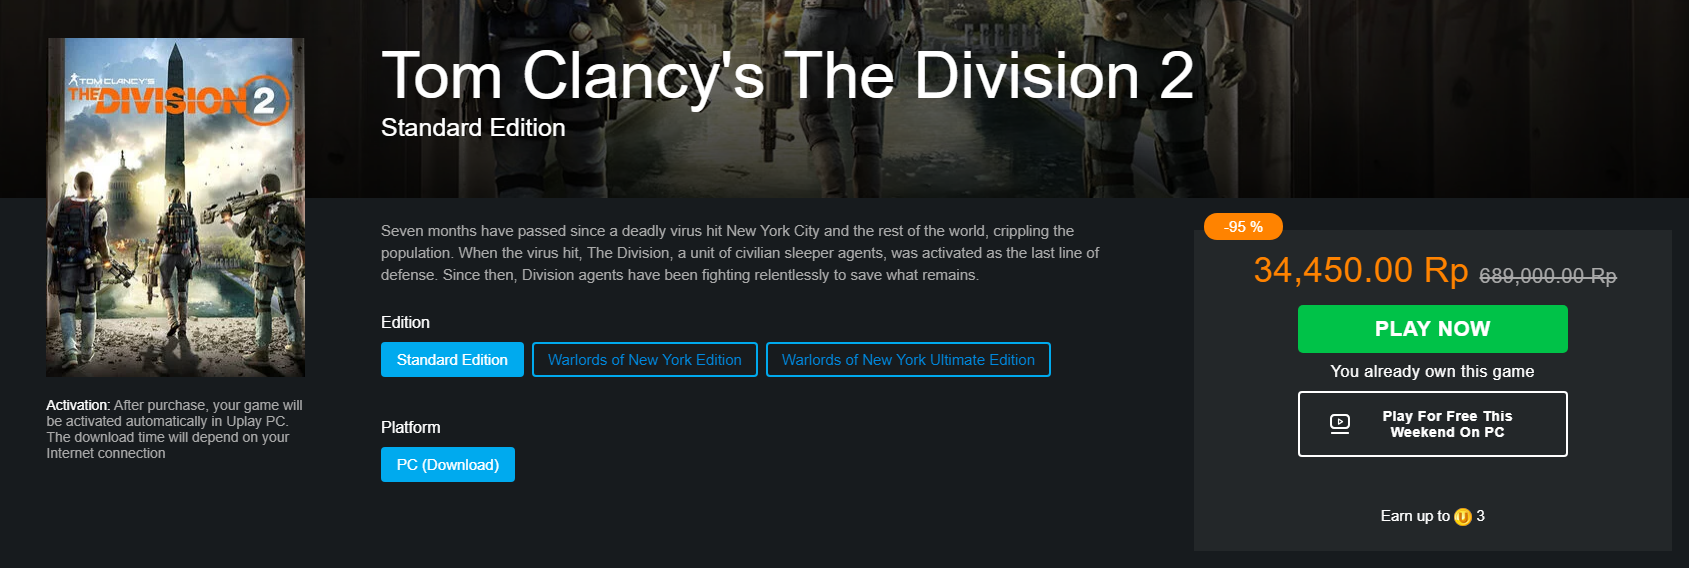 official-thread--grd-tom-clancy-s-the-division-2--history-will-remember